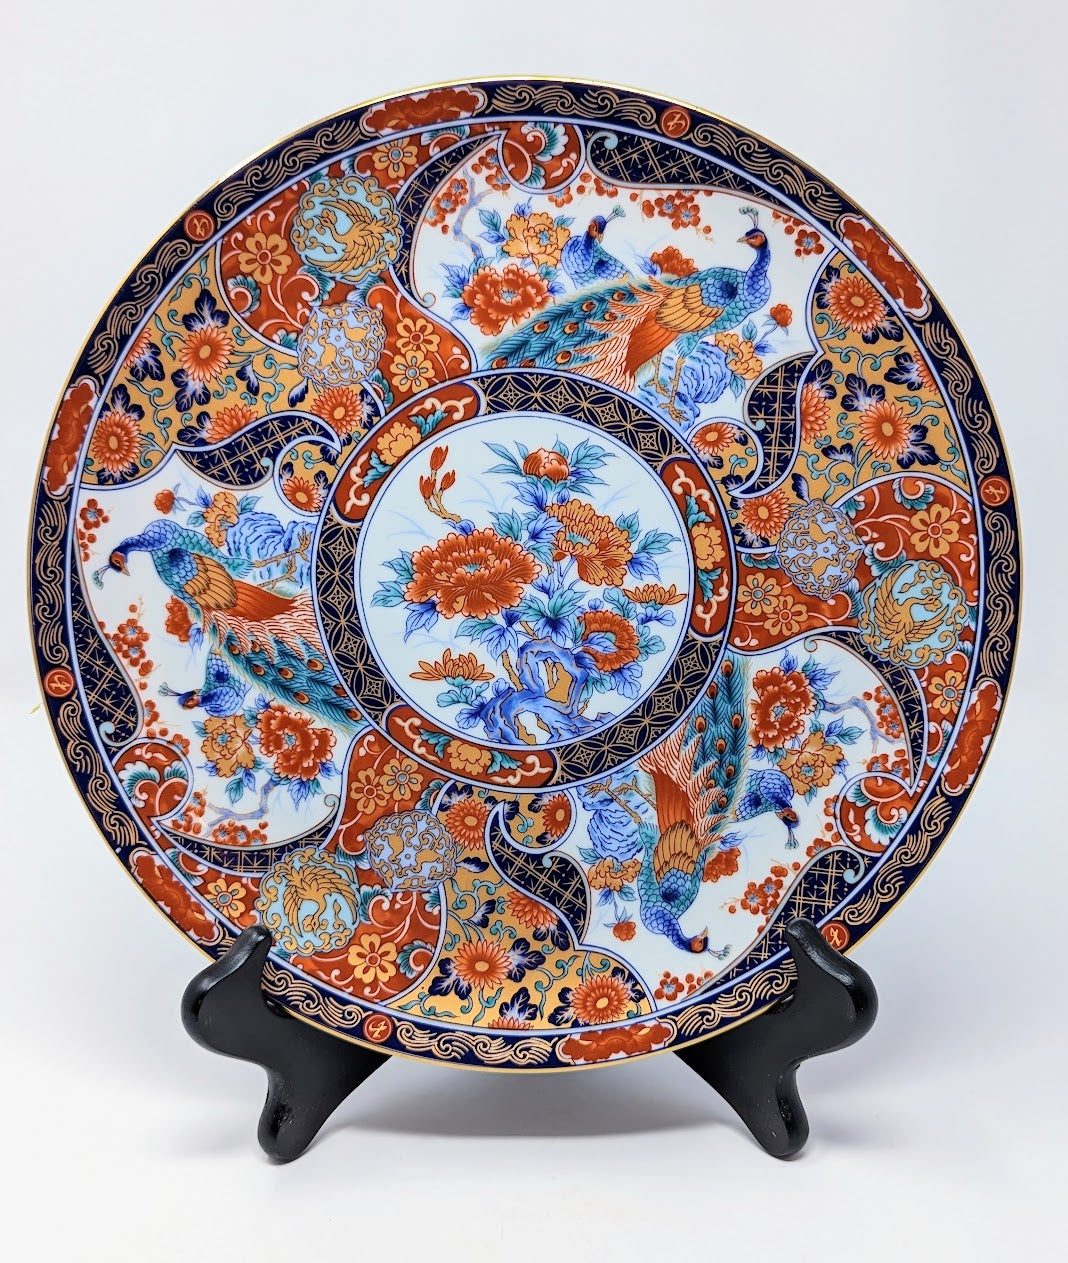 Vintage (c. 1950s) Japanese Imari Charger Plate | Floral with Peacocks